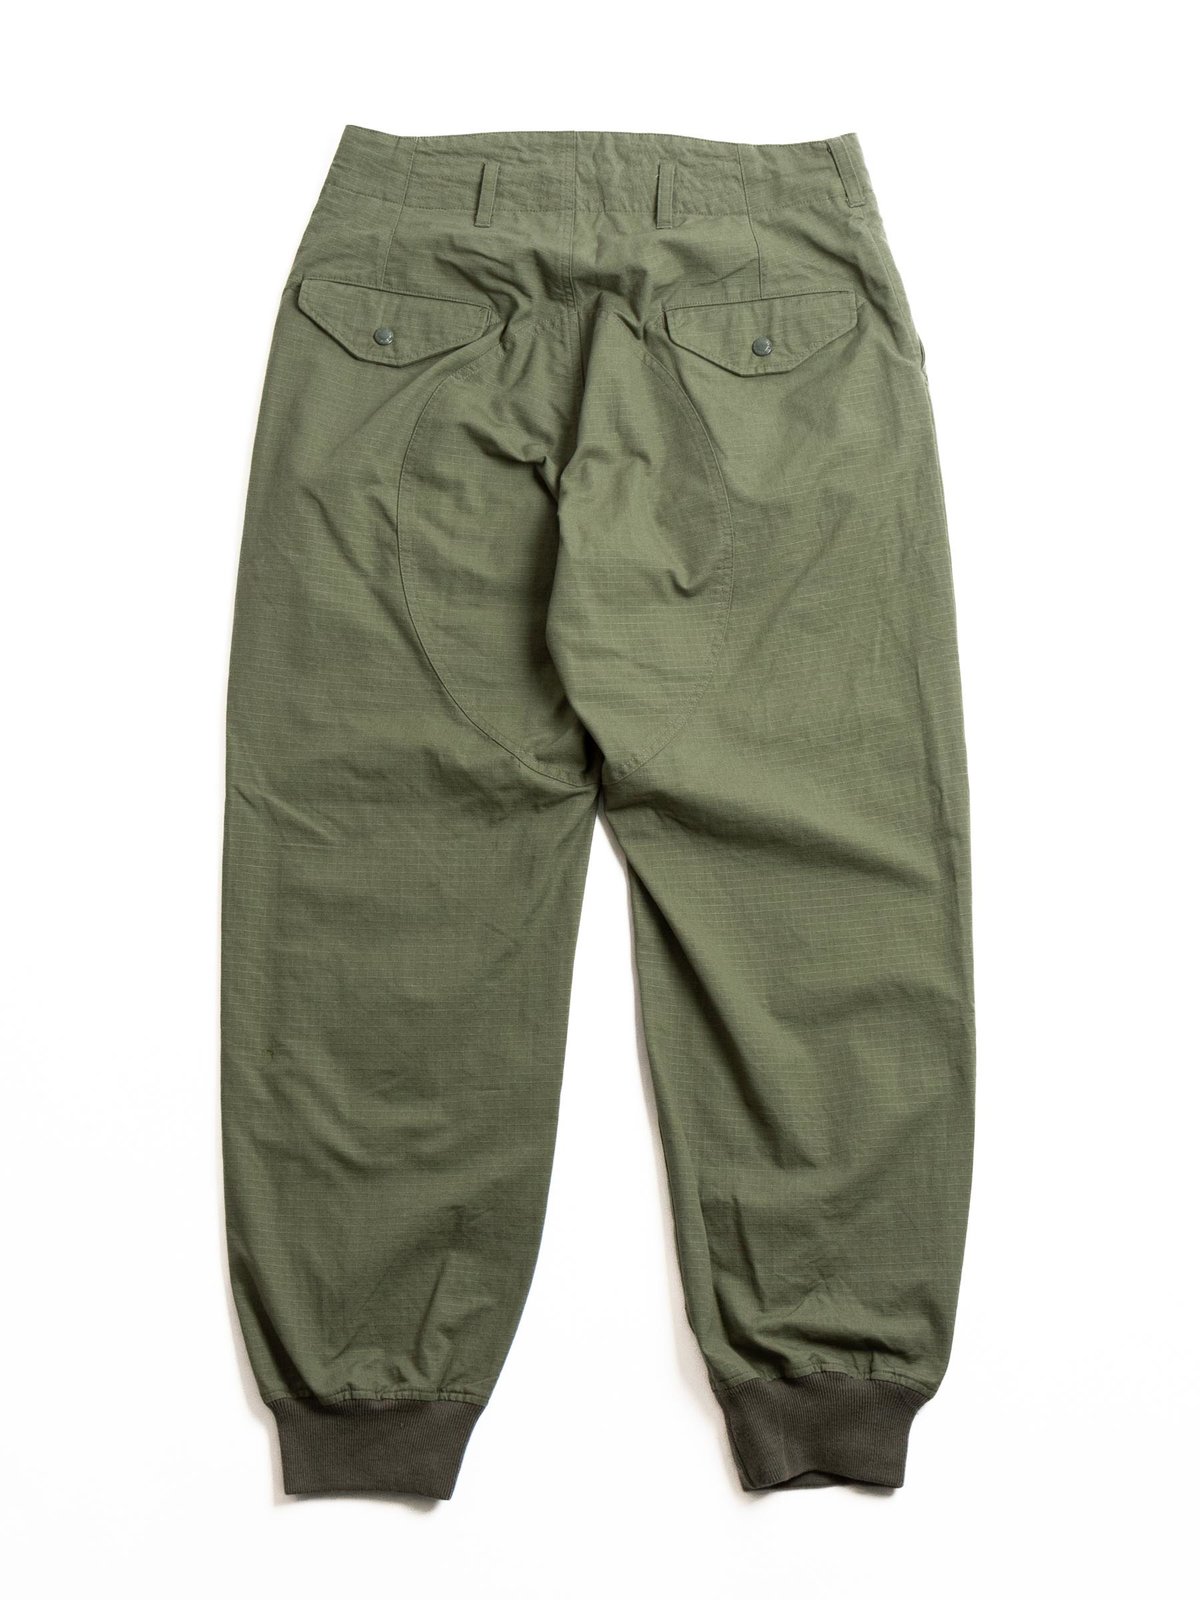 AIRBORNE PANT OLIVE COTTON RIPSTOP - Image 6